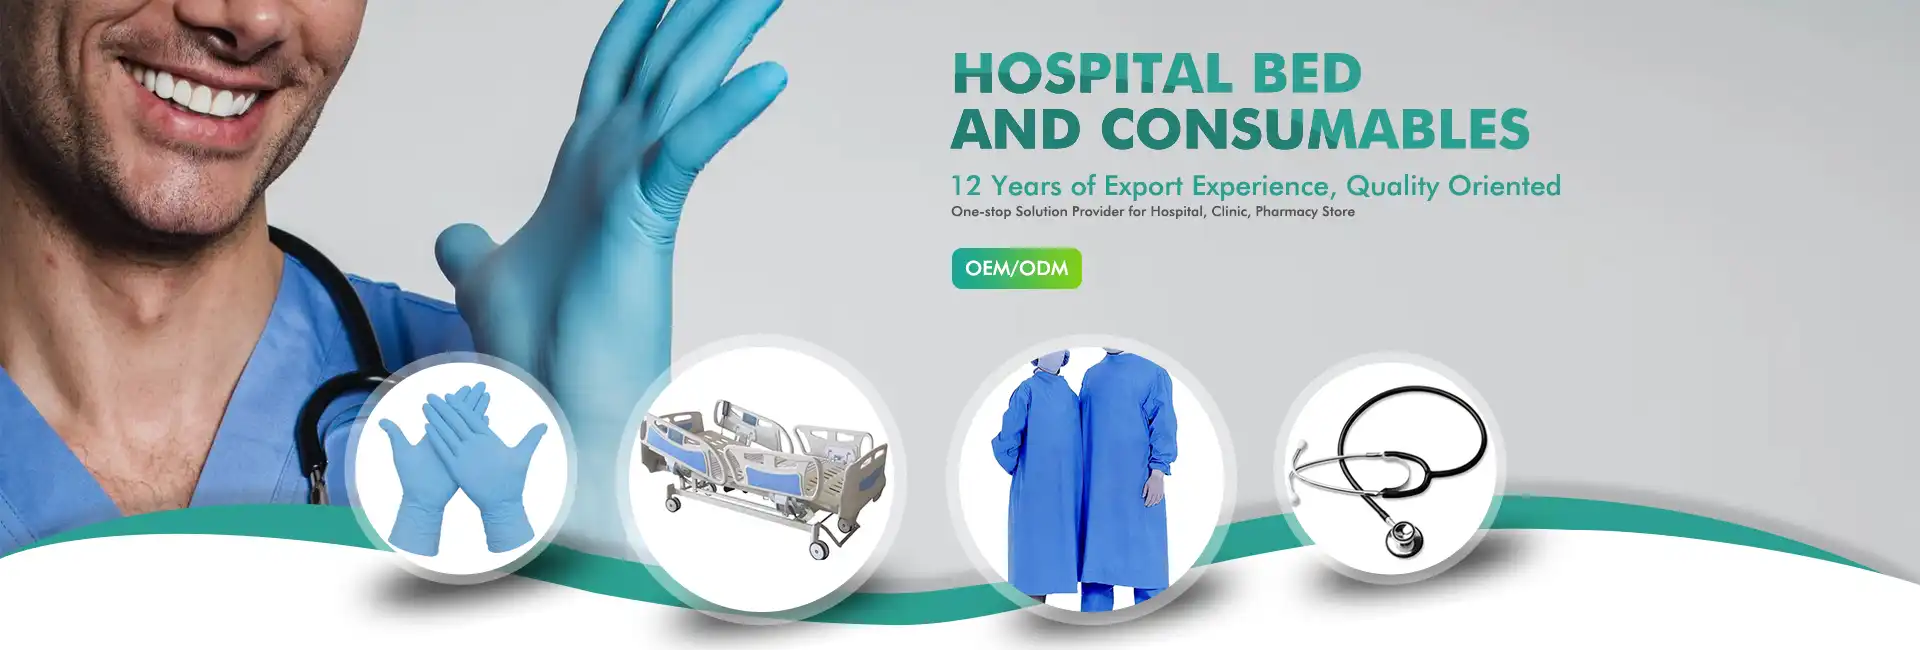 Hospital Bed and Consumables